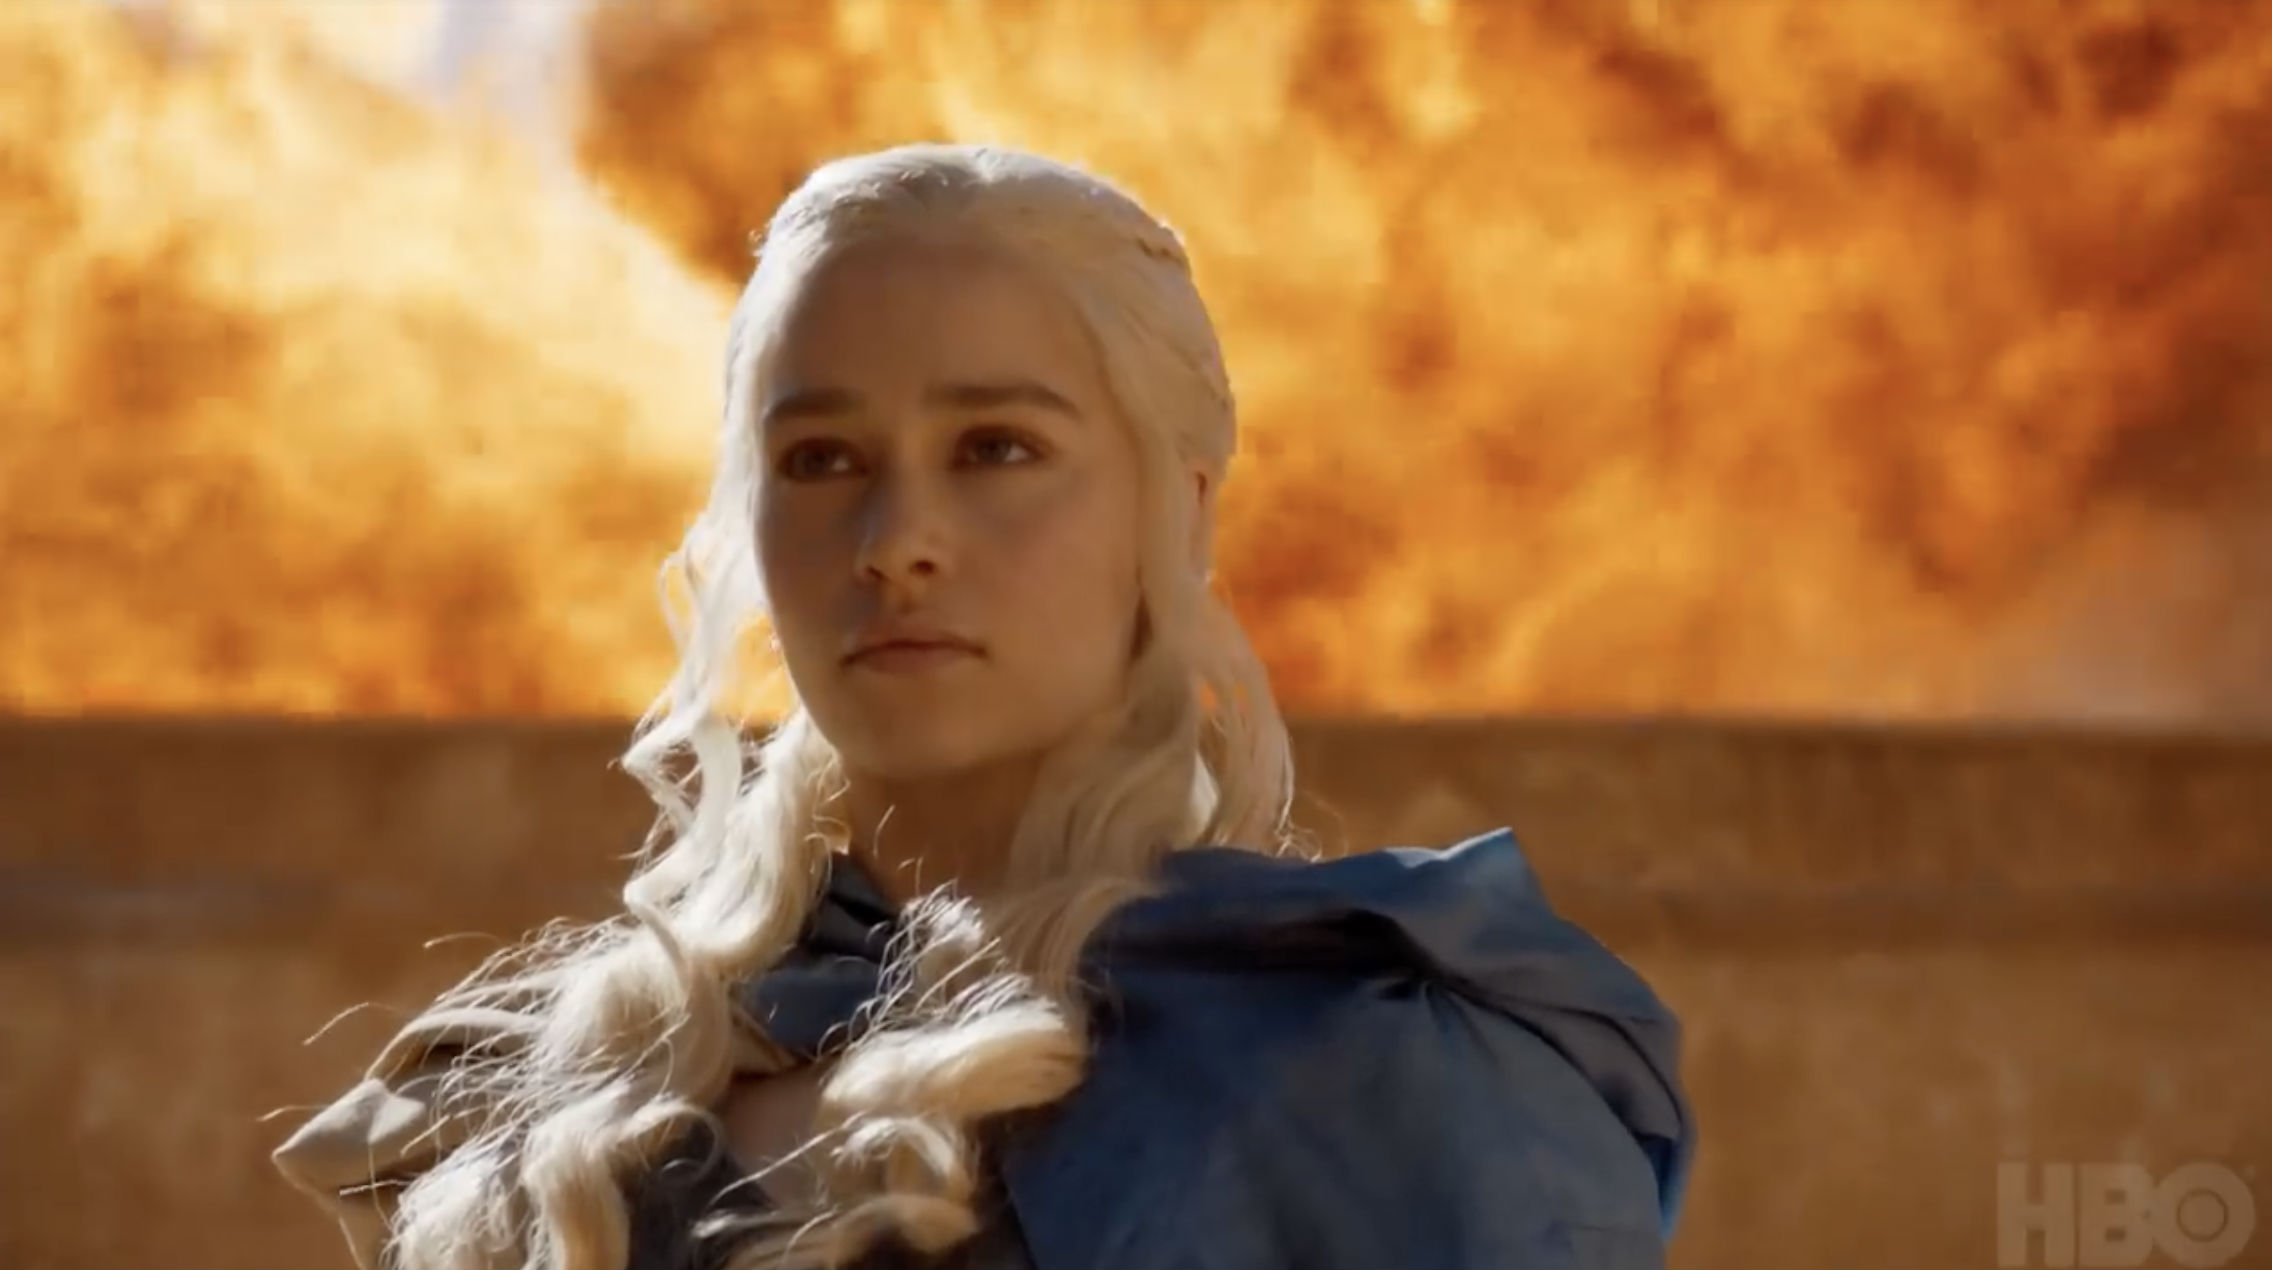 Game Of Thrones Cast Remembers Early Days On Set In New Featurette